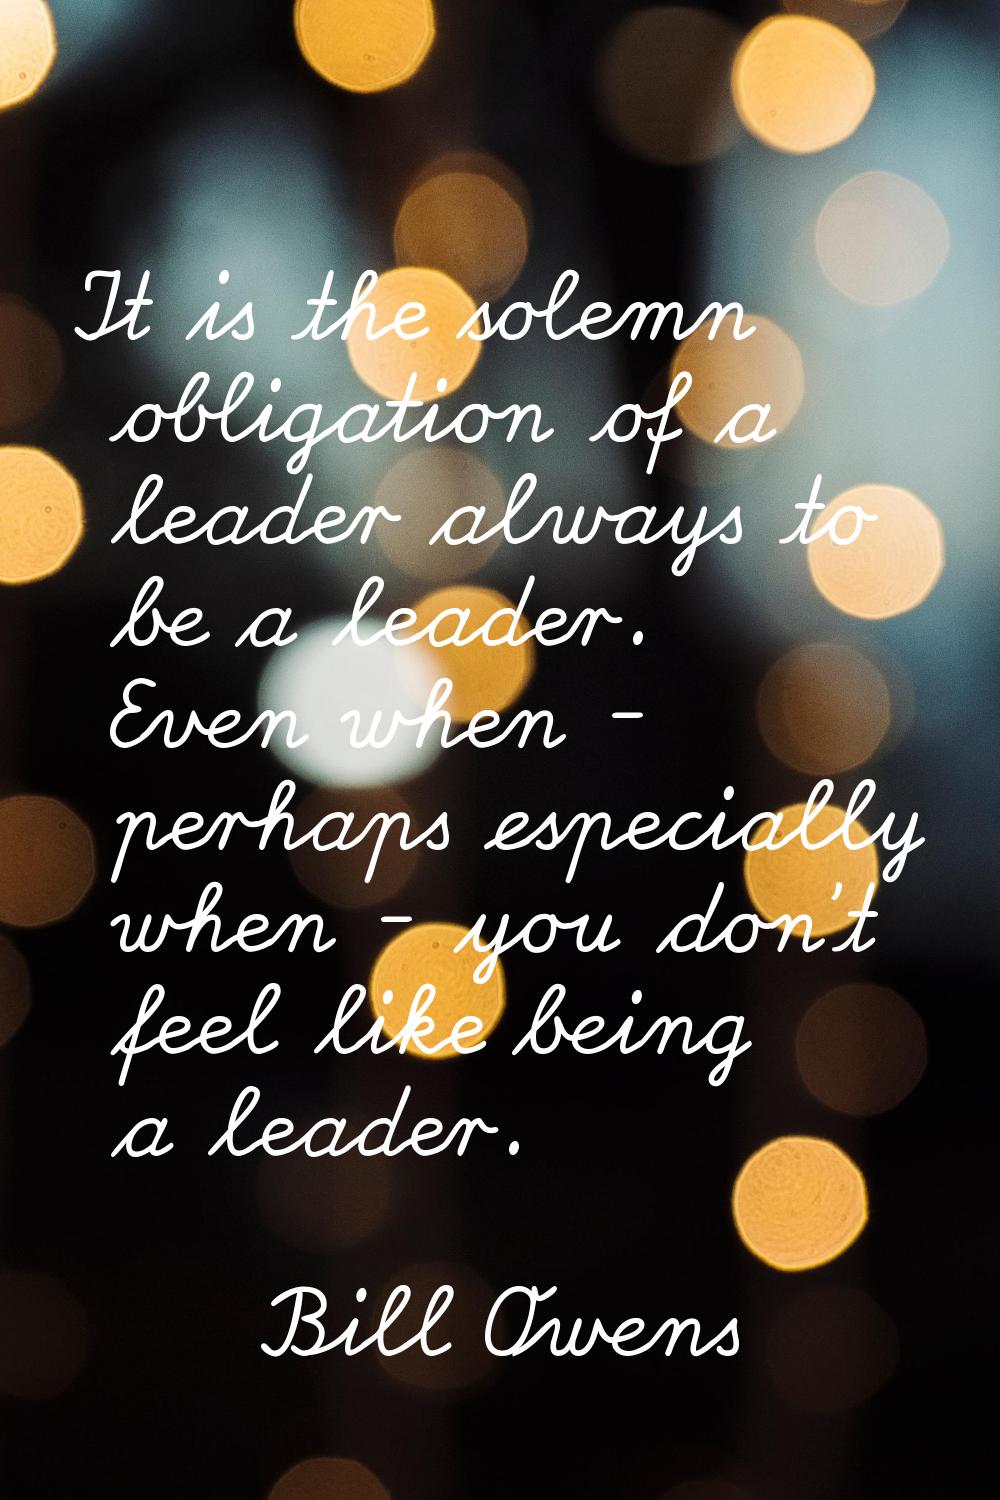 It is the solemn obligation of a leader always to be a leader. Even when - perhaps especially when 